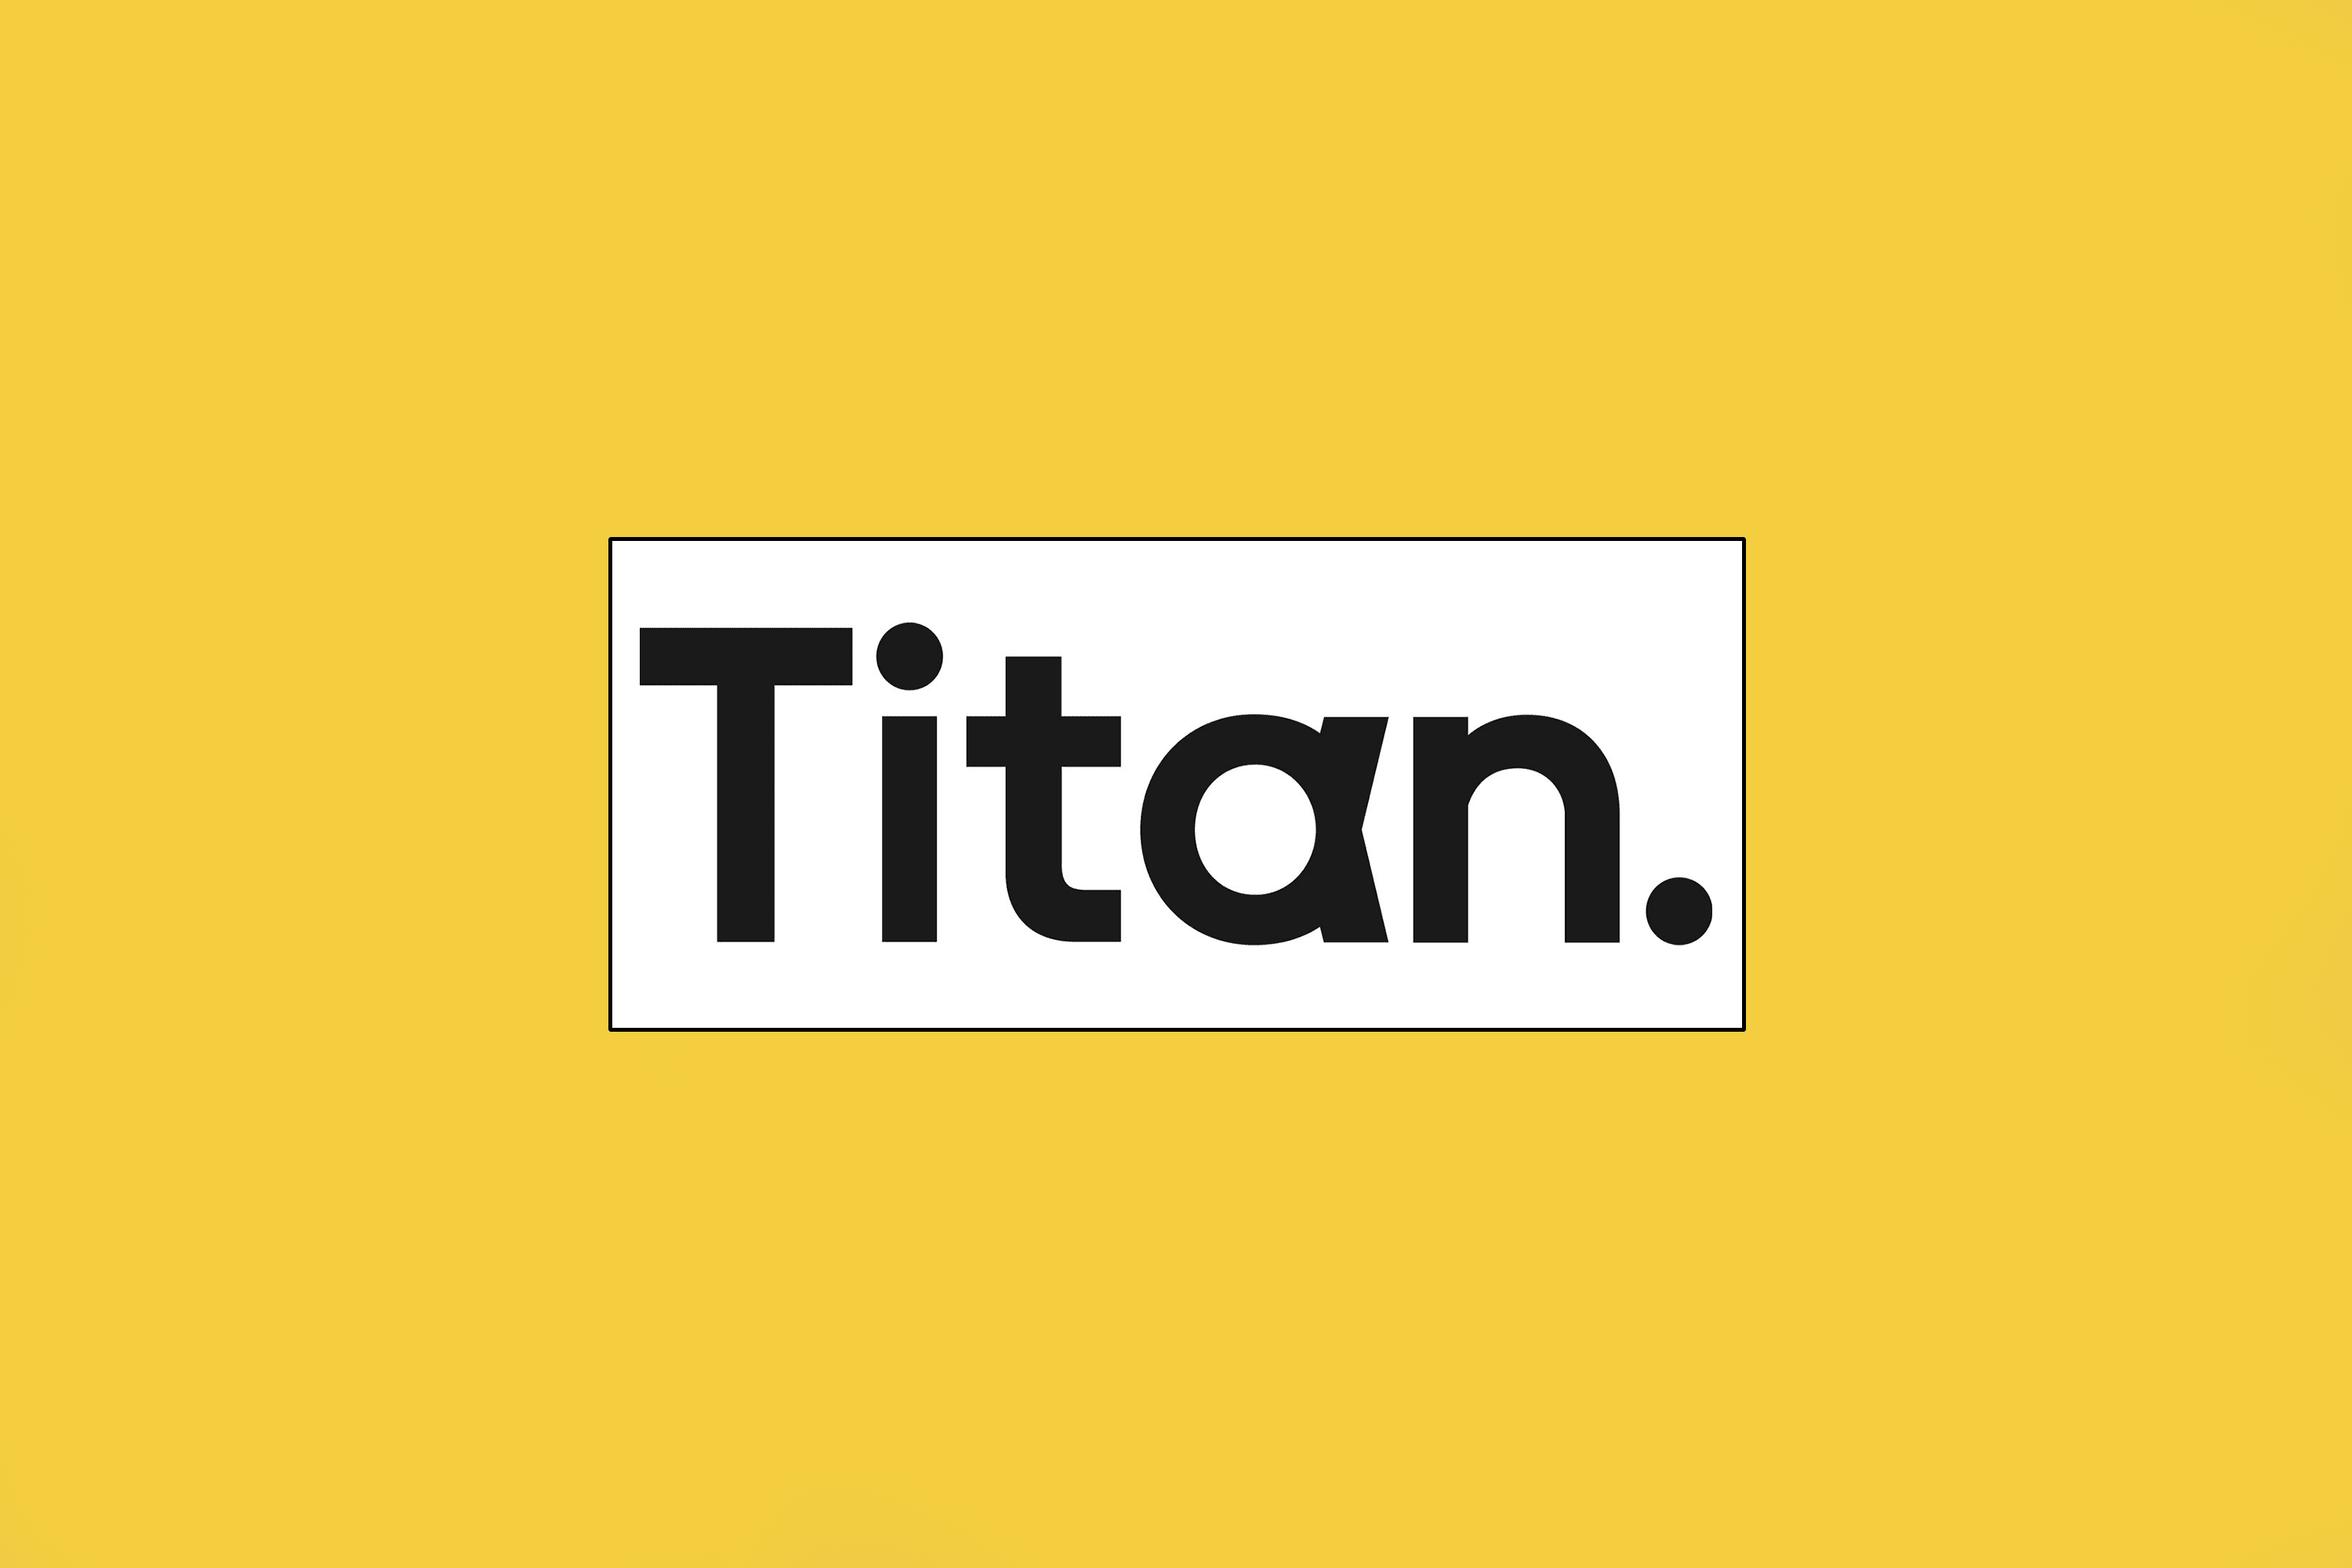 Image shows Titan logo in the center of a yellow background.